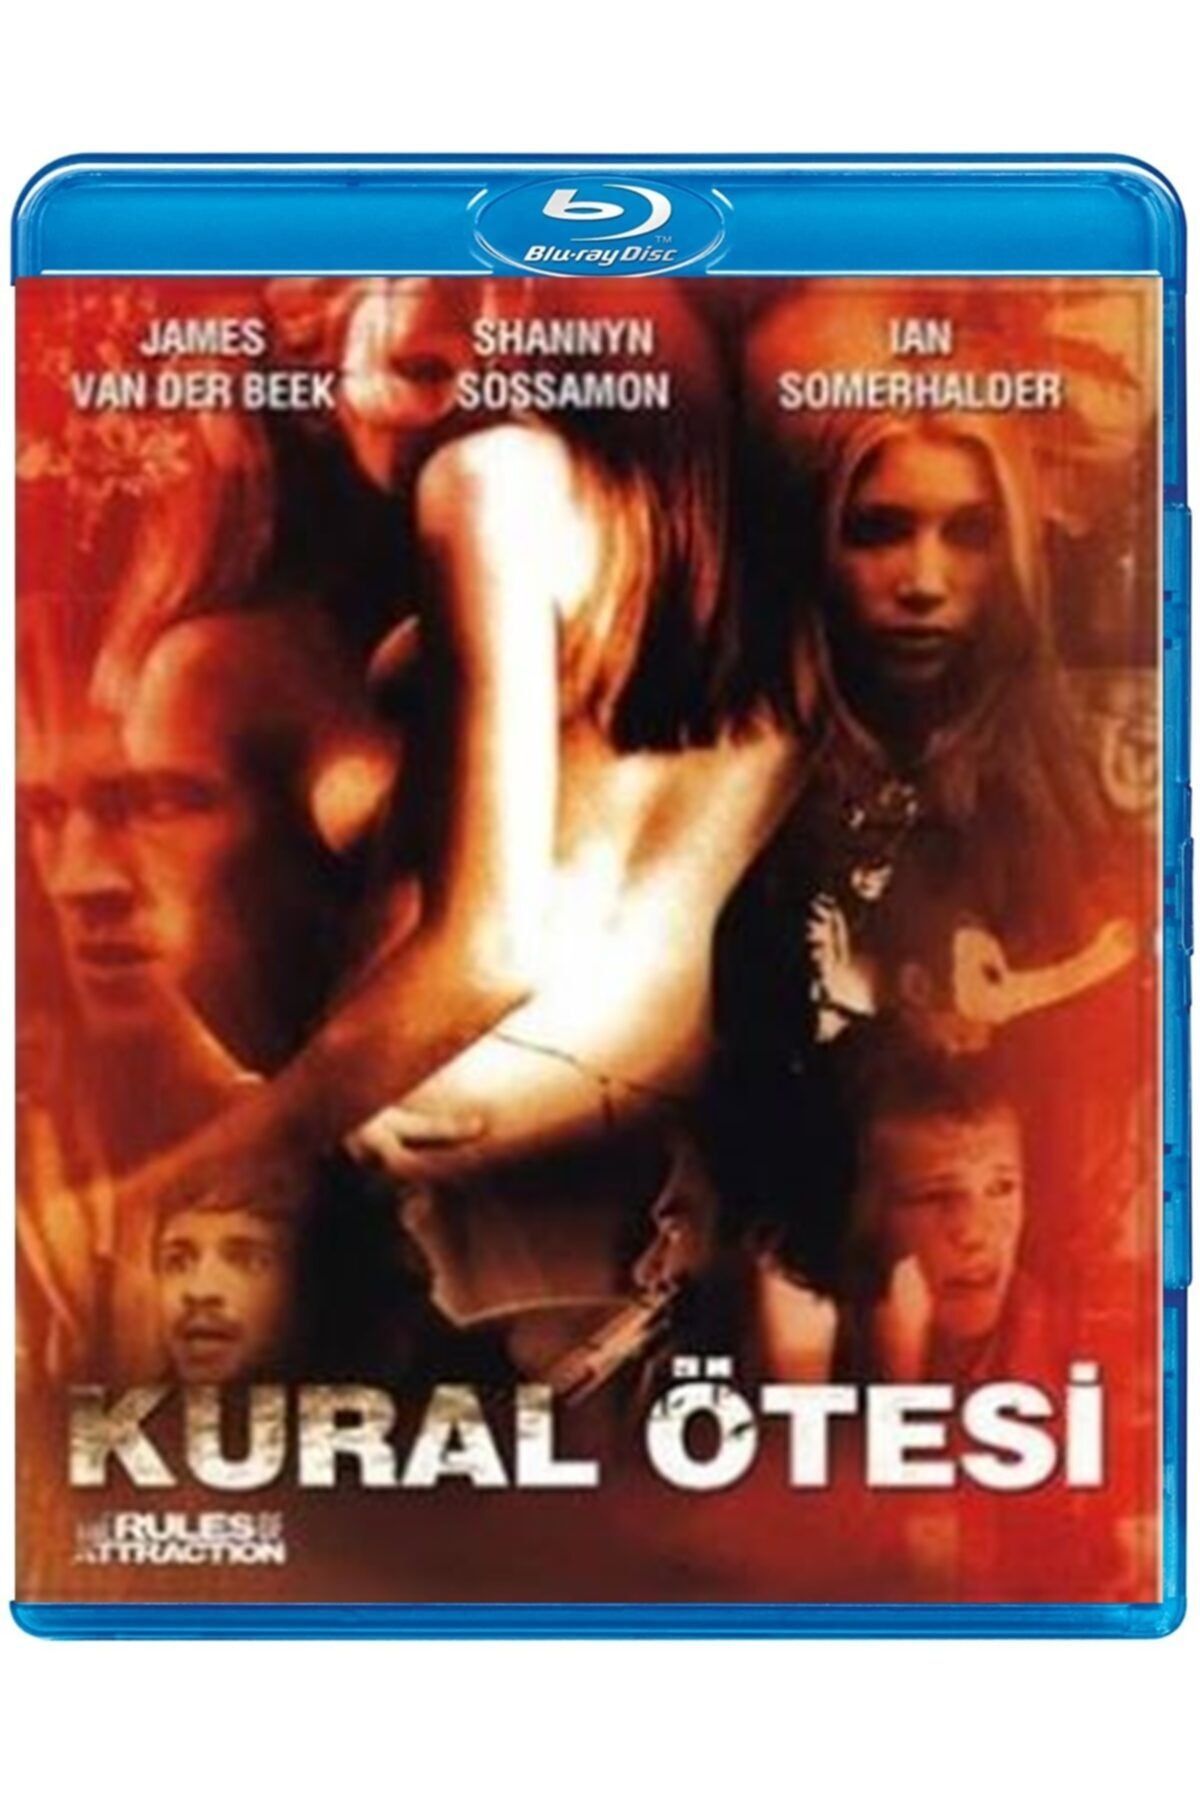 The Rules of Attraction (2002) 1579Kbps 23.976Fps 48Khz BluRay DTS-HD MA 2.0Ch Turkish Audio TAC